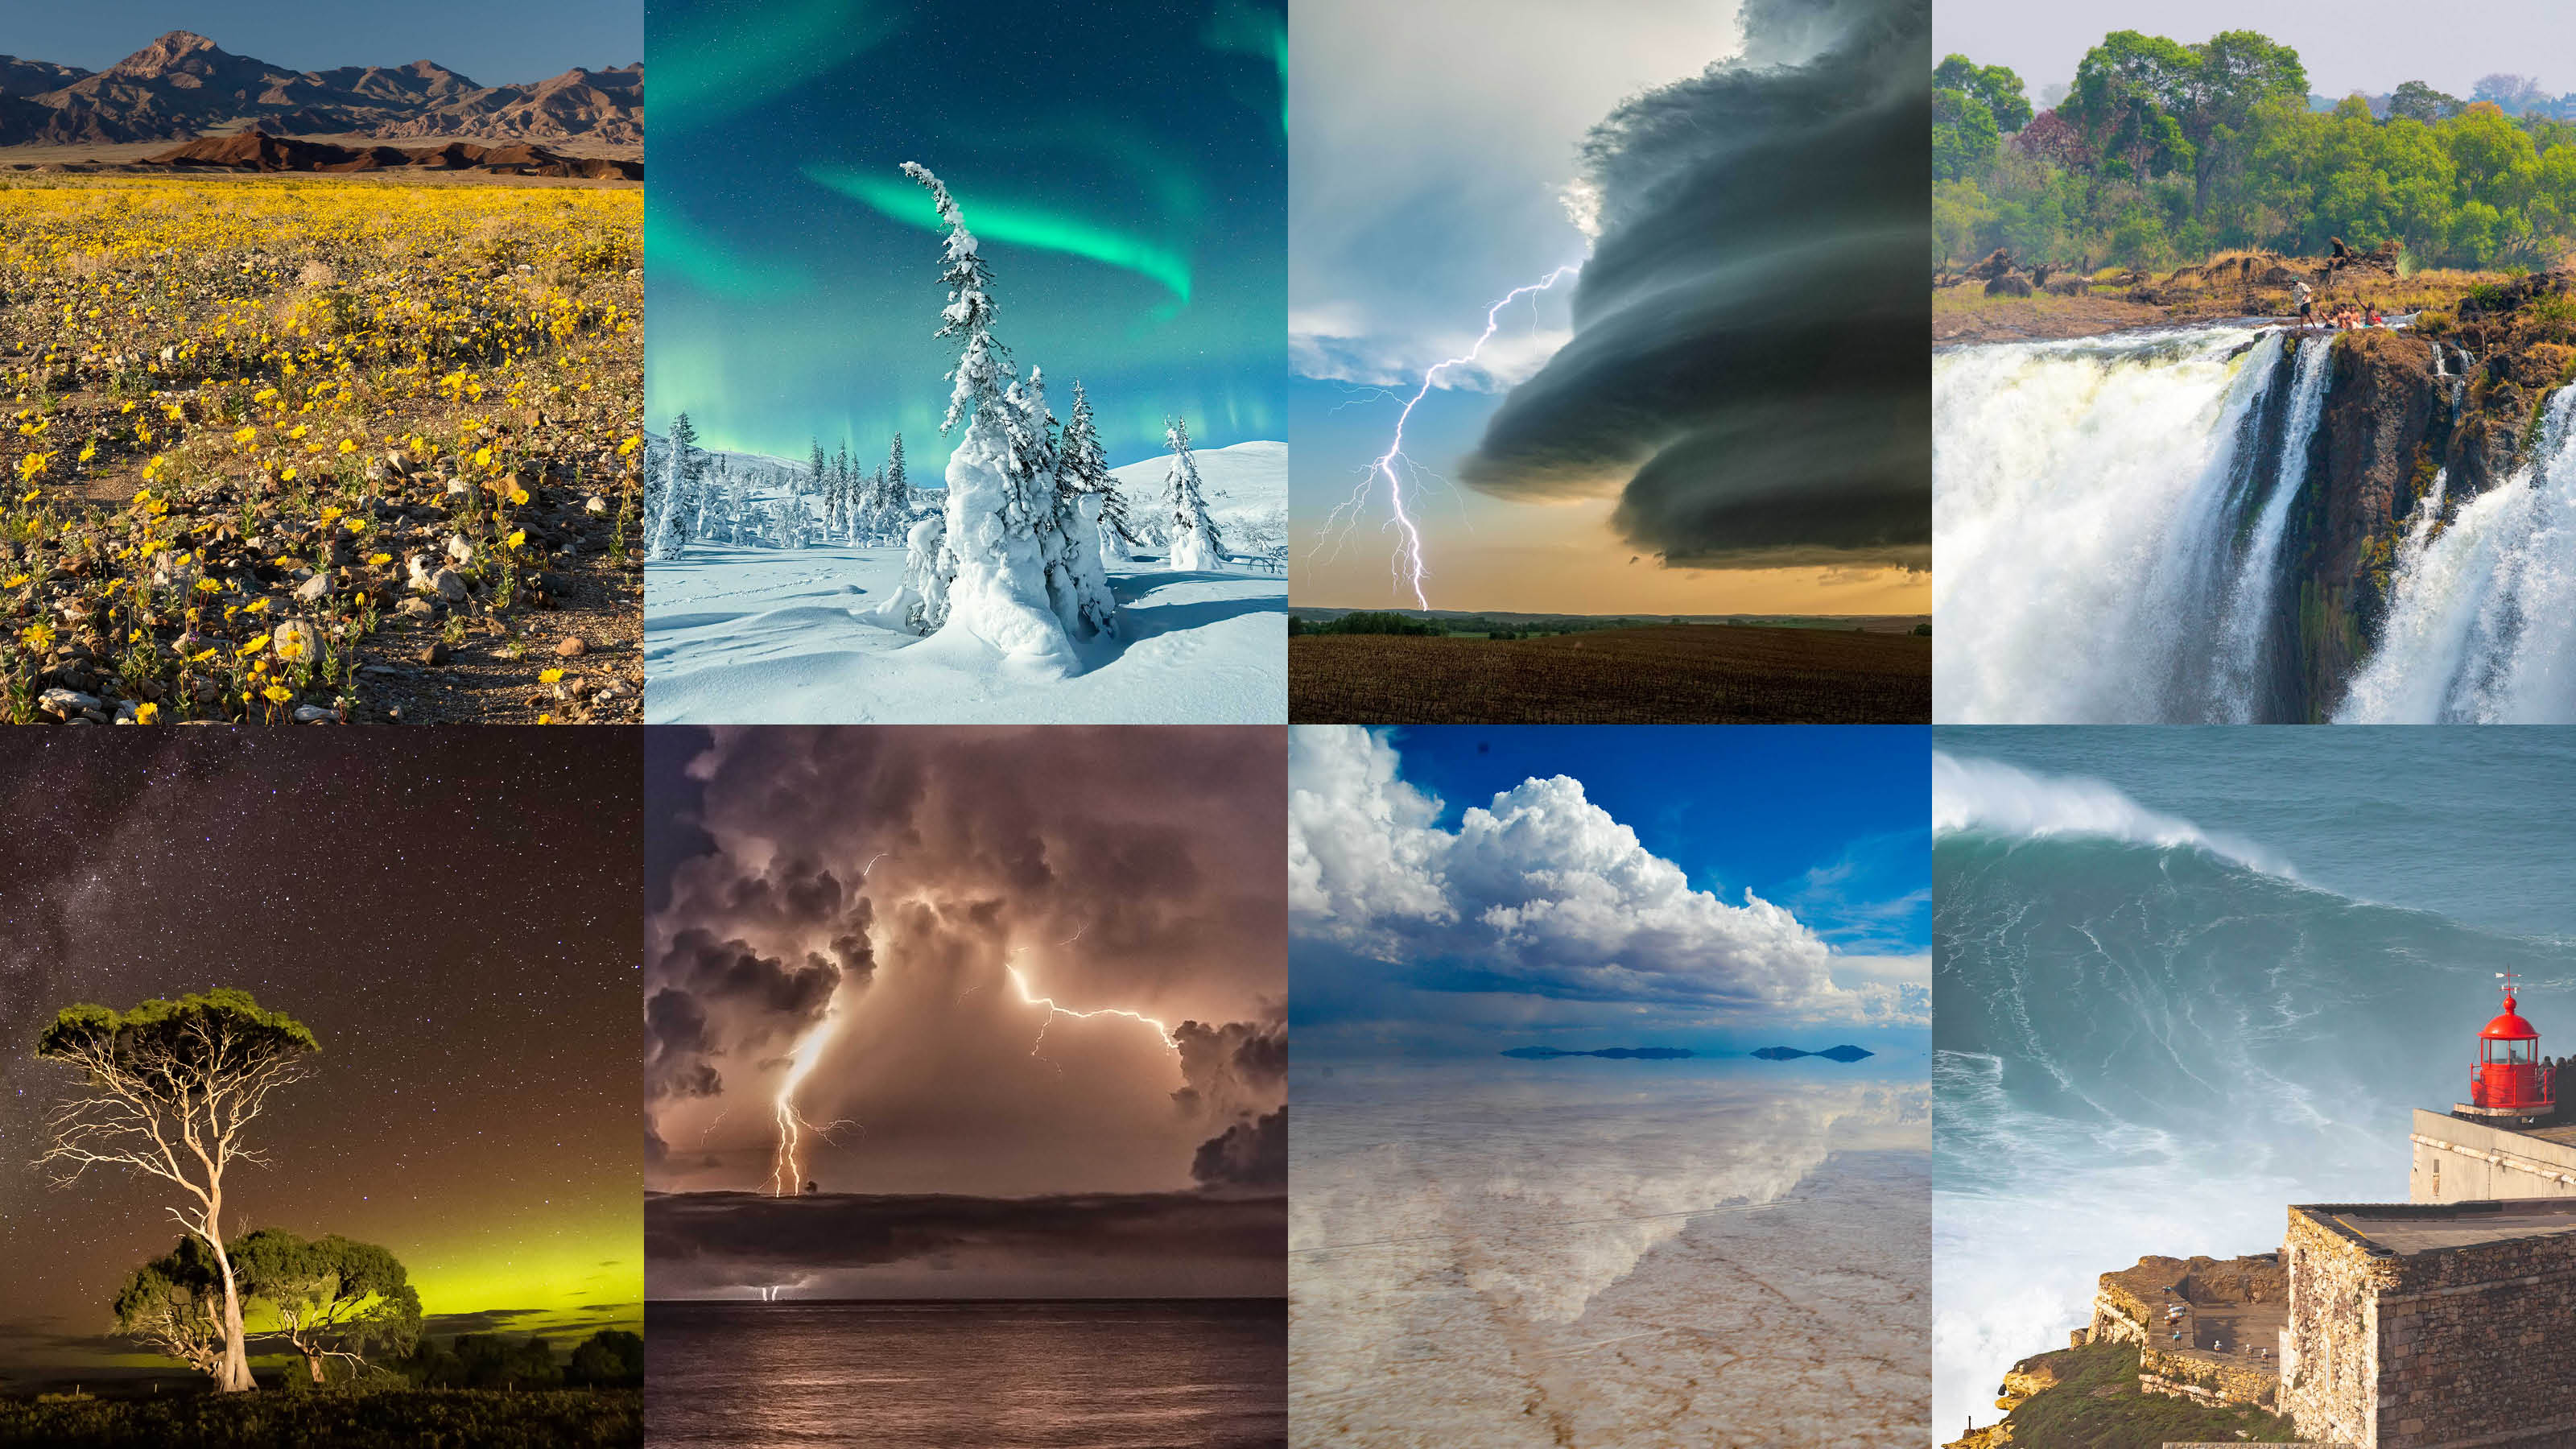 Jaw-dropping Natural Phenomena From Around The World - Sights To Behold